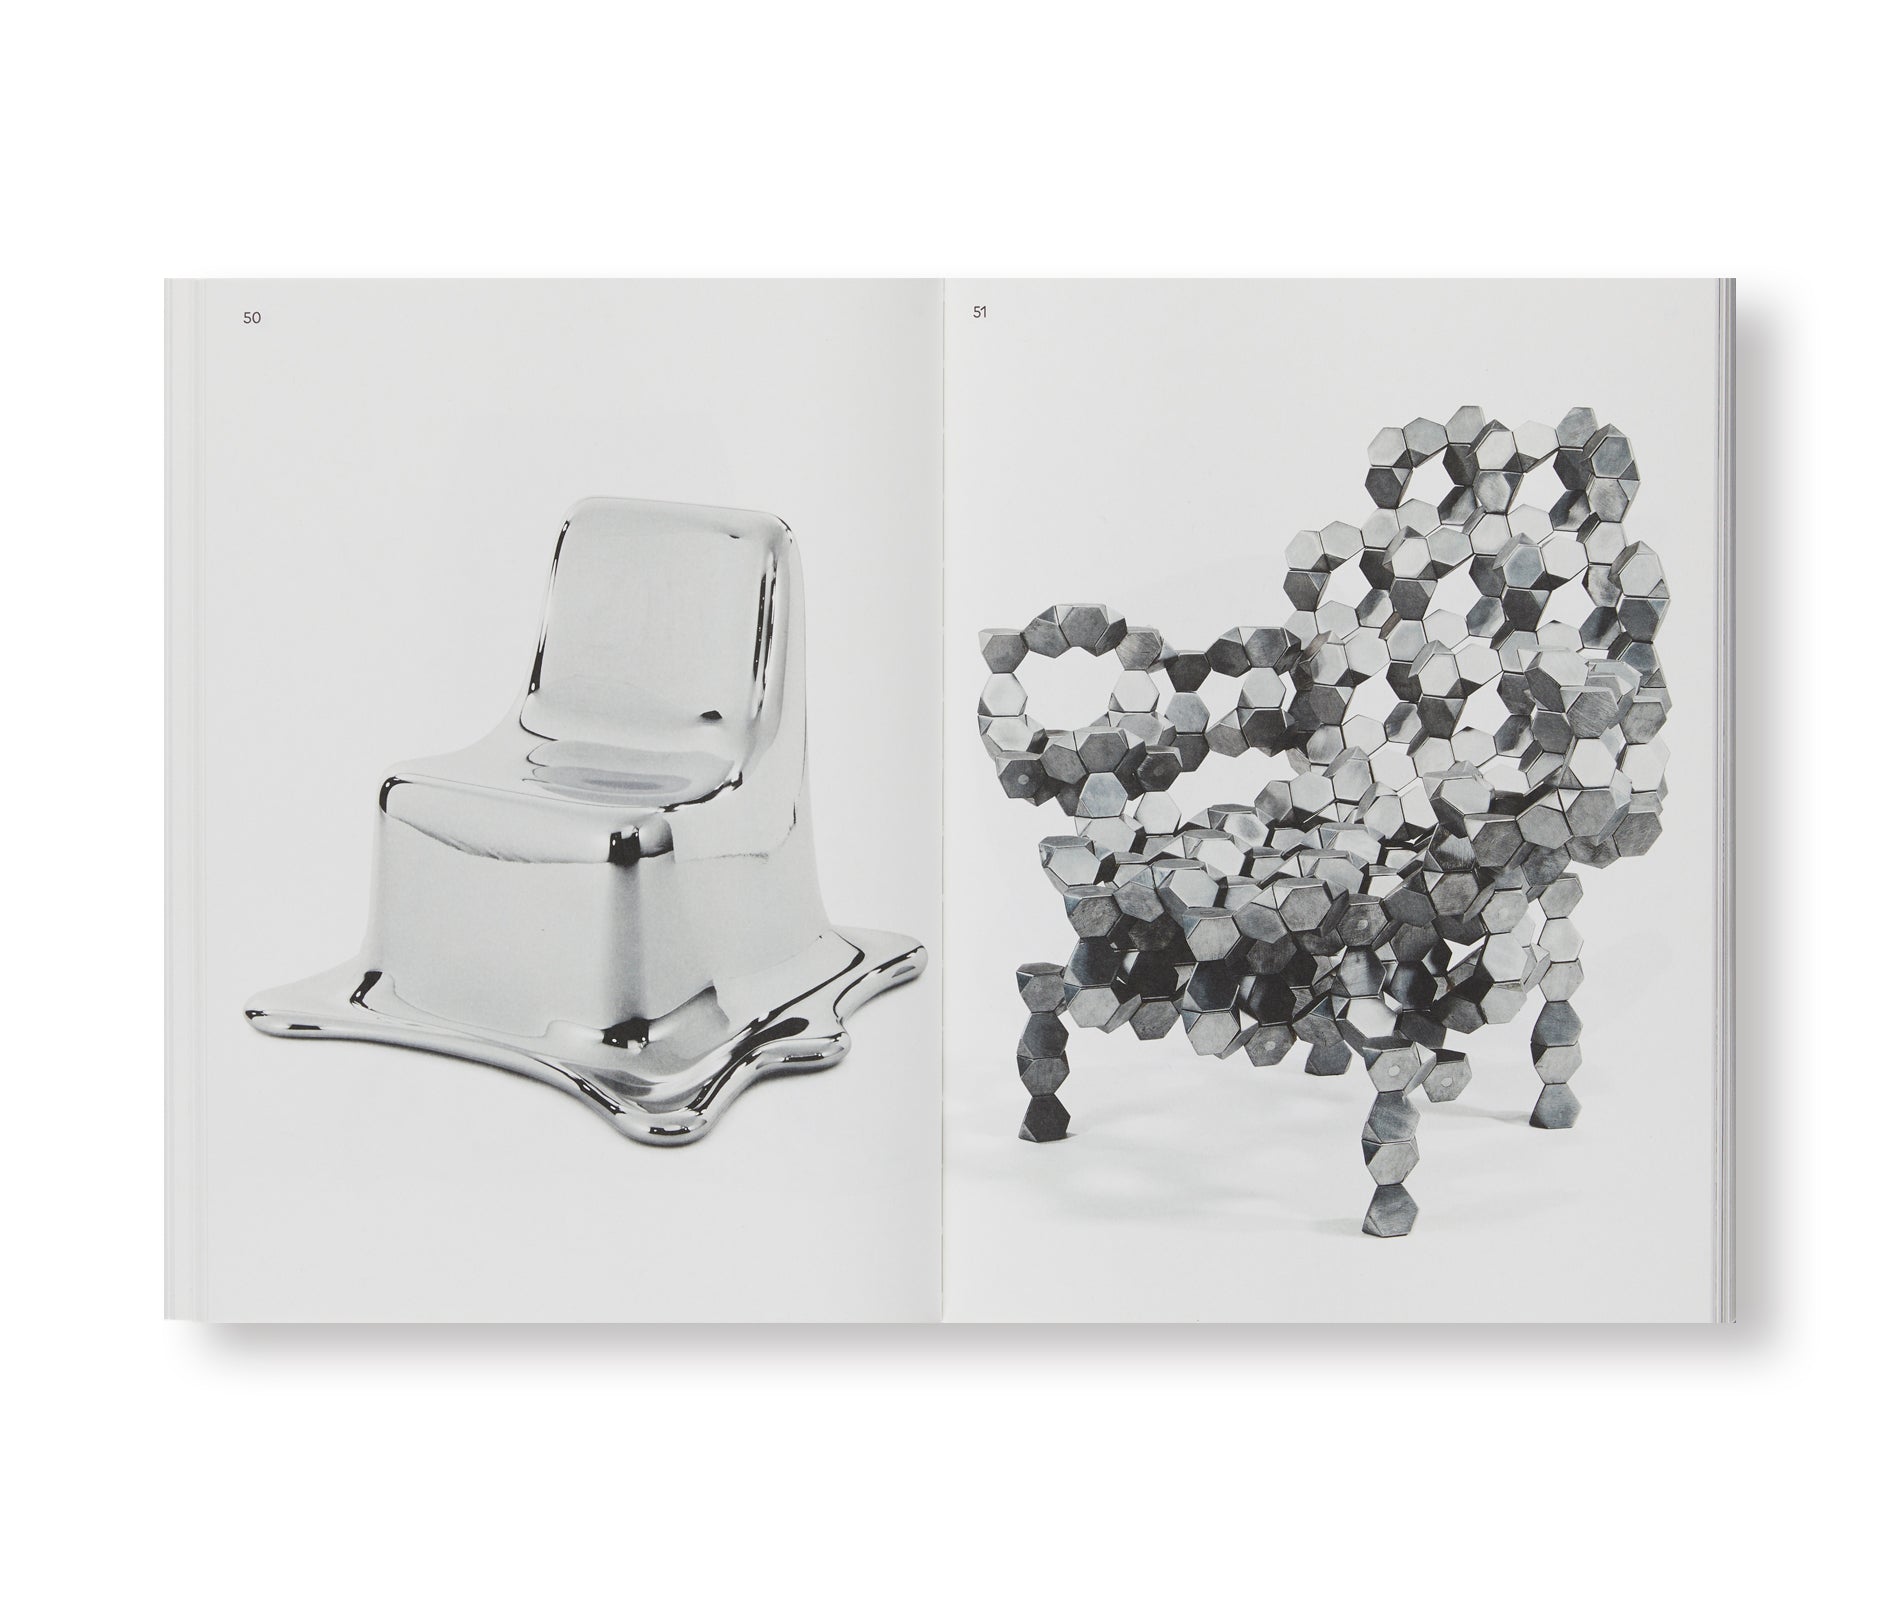 THE SPIRIT OF CHAIRS: THE CHAIR COLLECTION OF THIERRY BARBIER-MUELLER